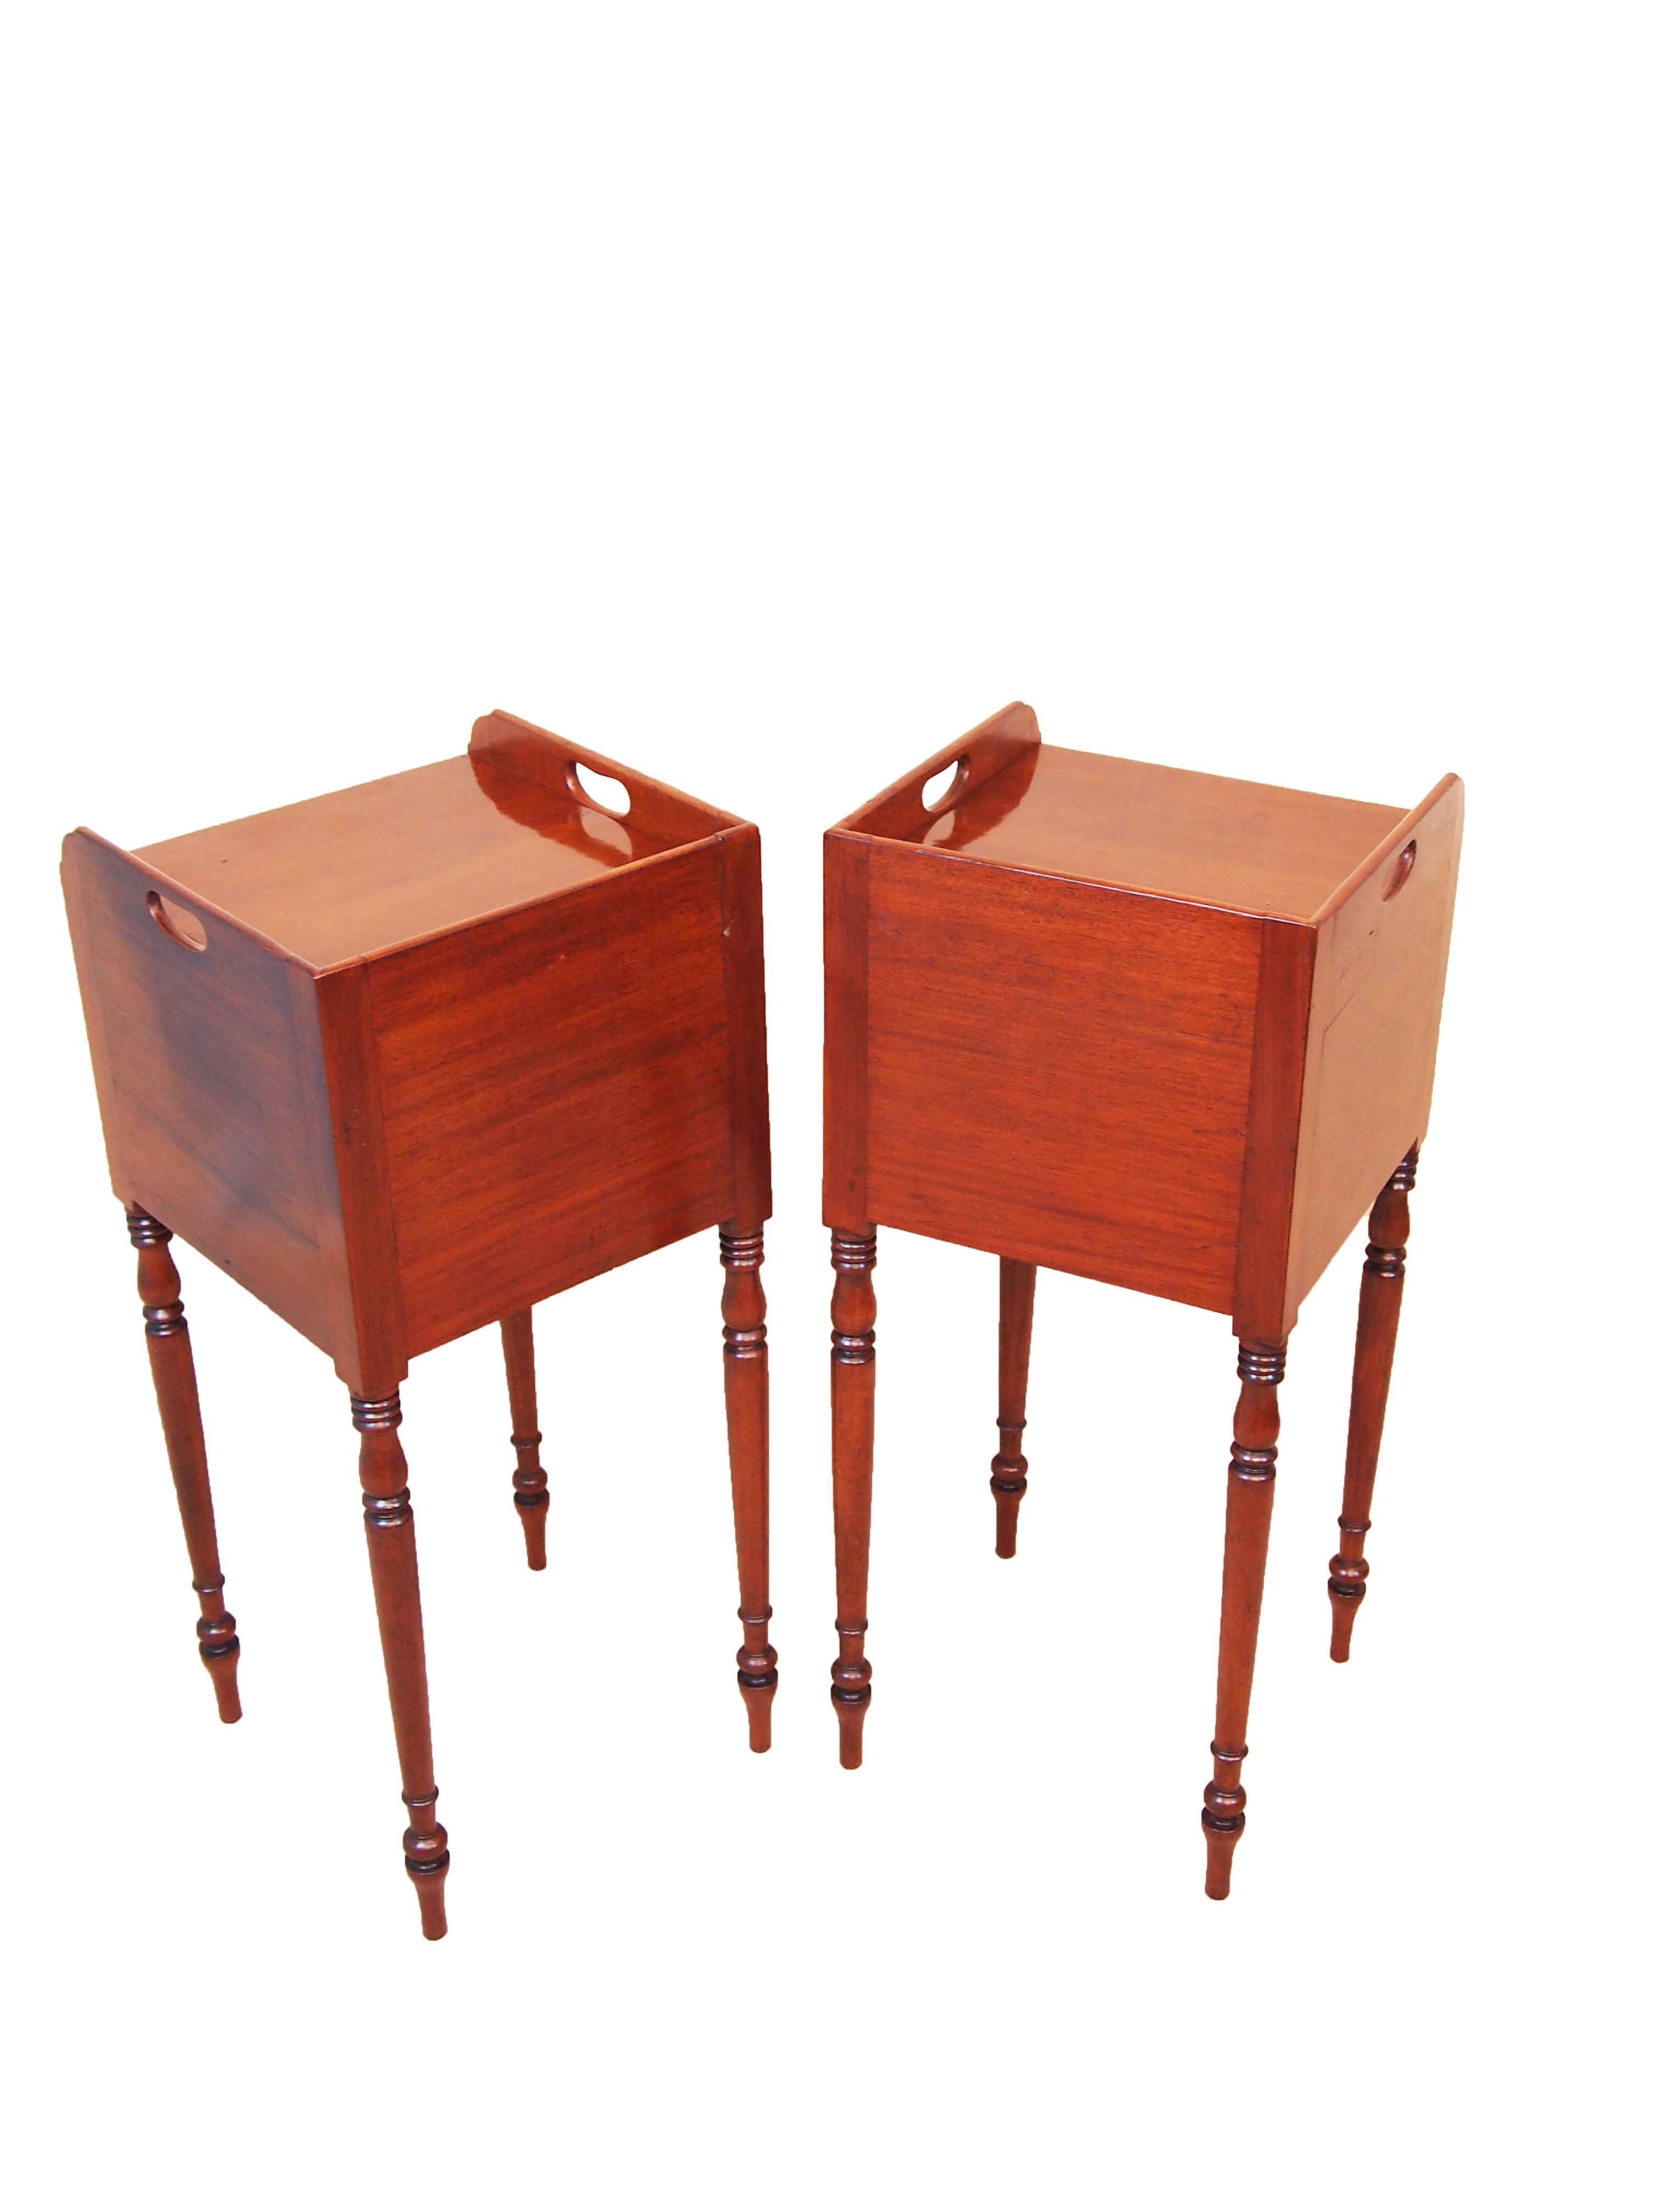 English Antique Regency Mahogany Pair of Bedside Cupboards